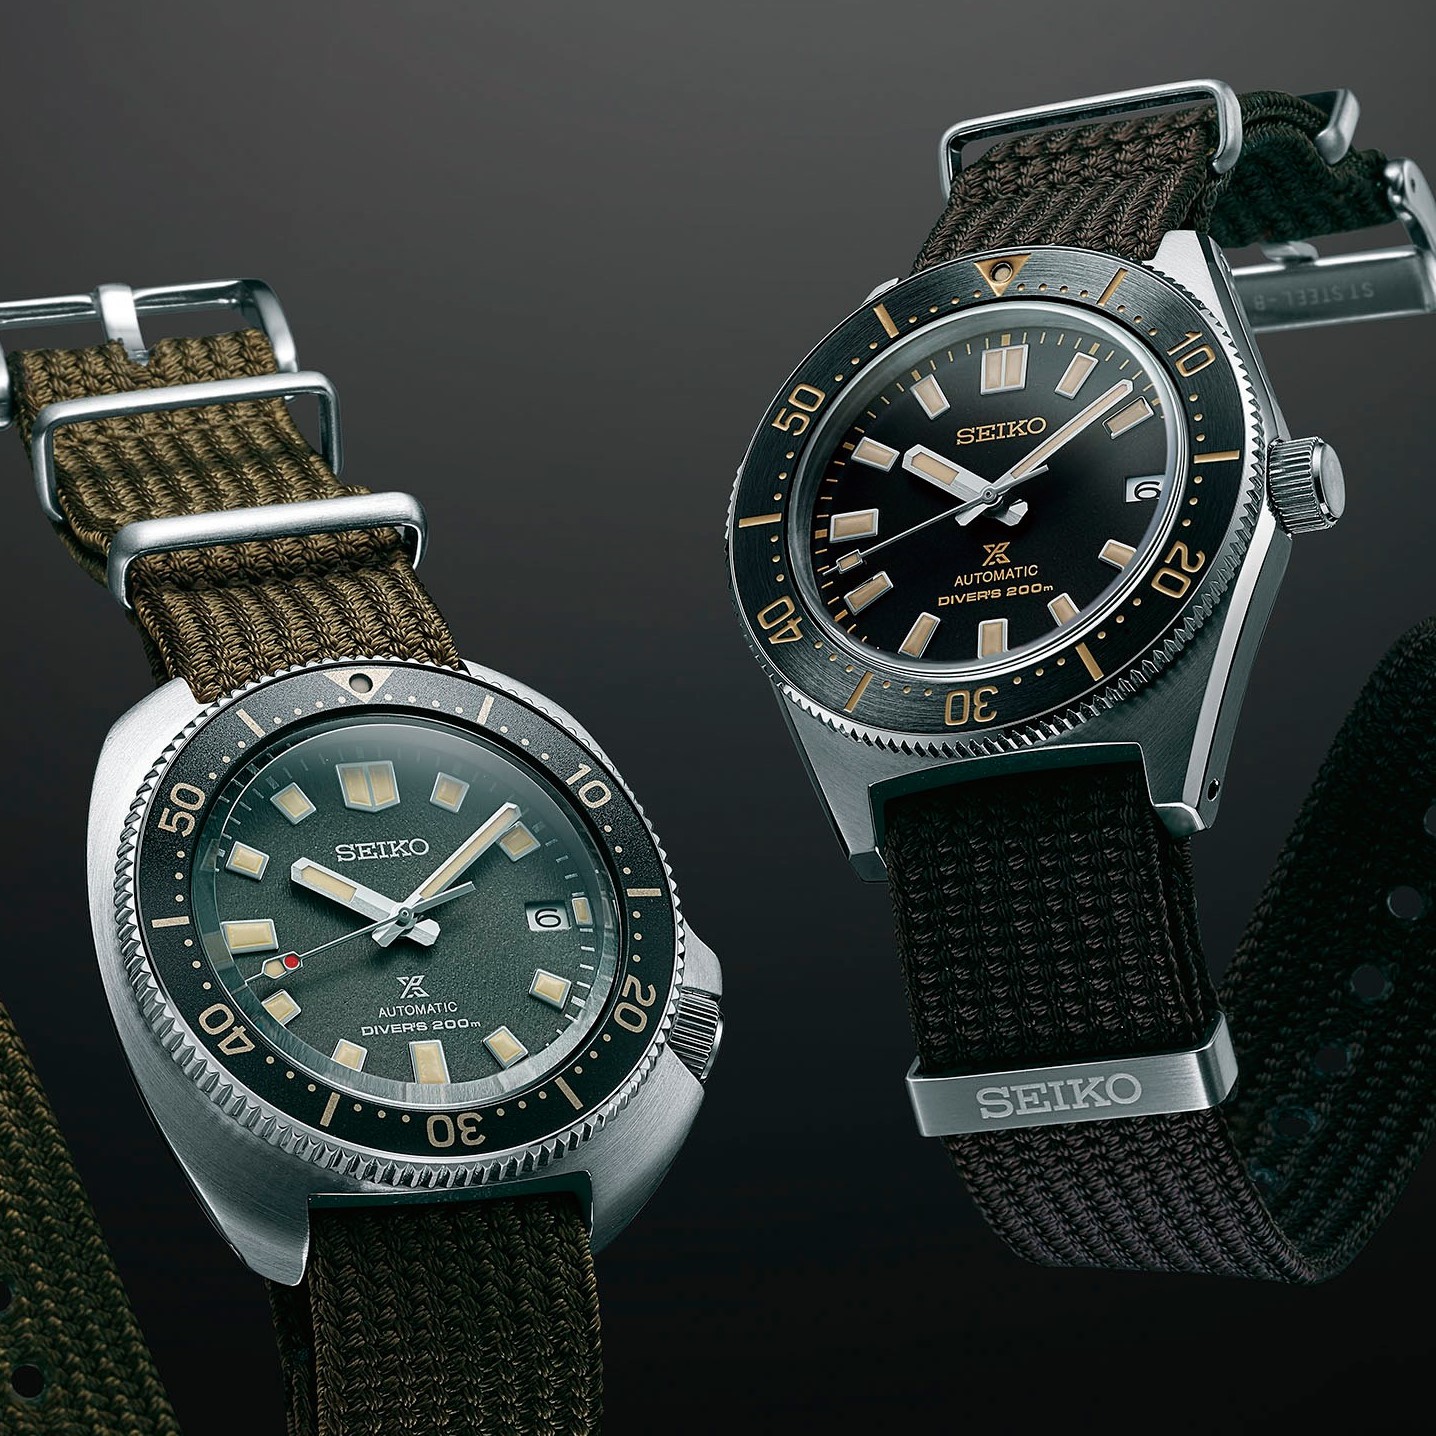 Litteratur Malawi Giraf Vintage Dive Watches Resurface as Seiko Introduces New SPB239 and SPB237,  Inspired by '60s and '70s Models | WatchTime - USA's No.1 Watch Magazine